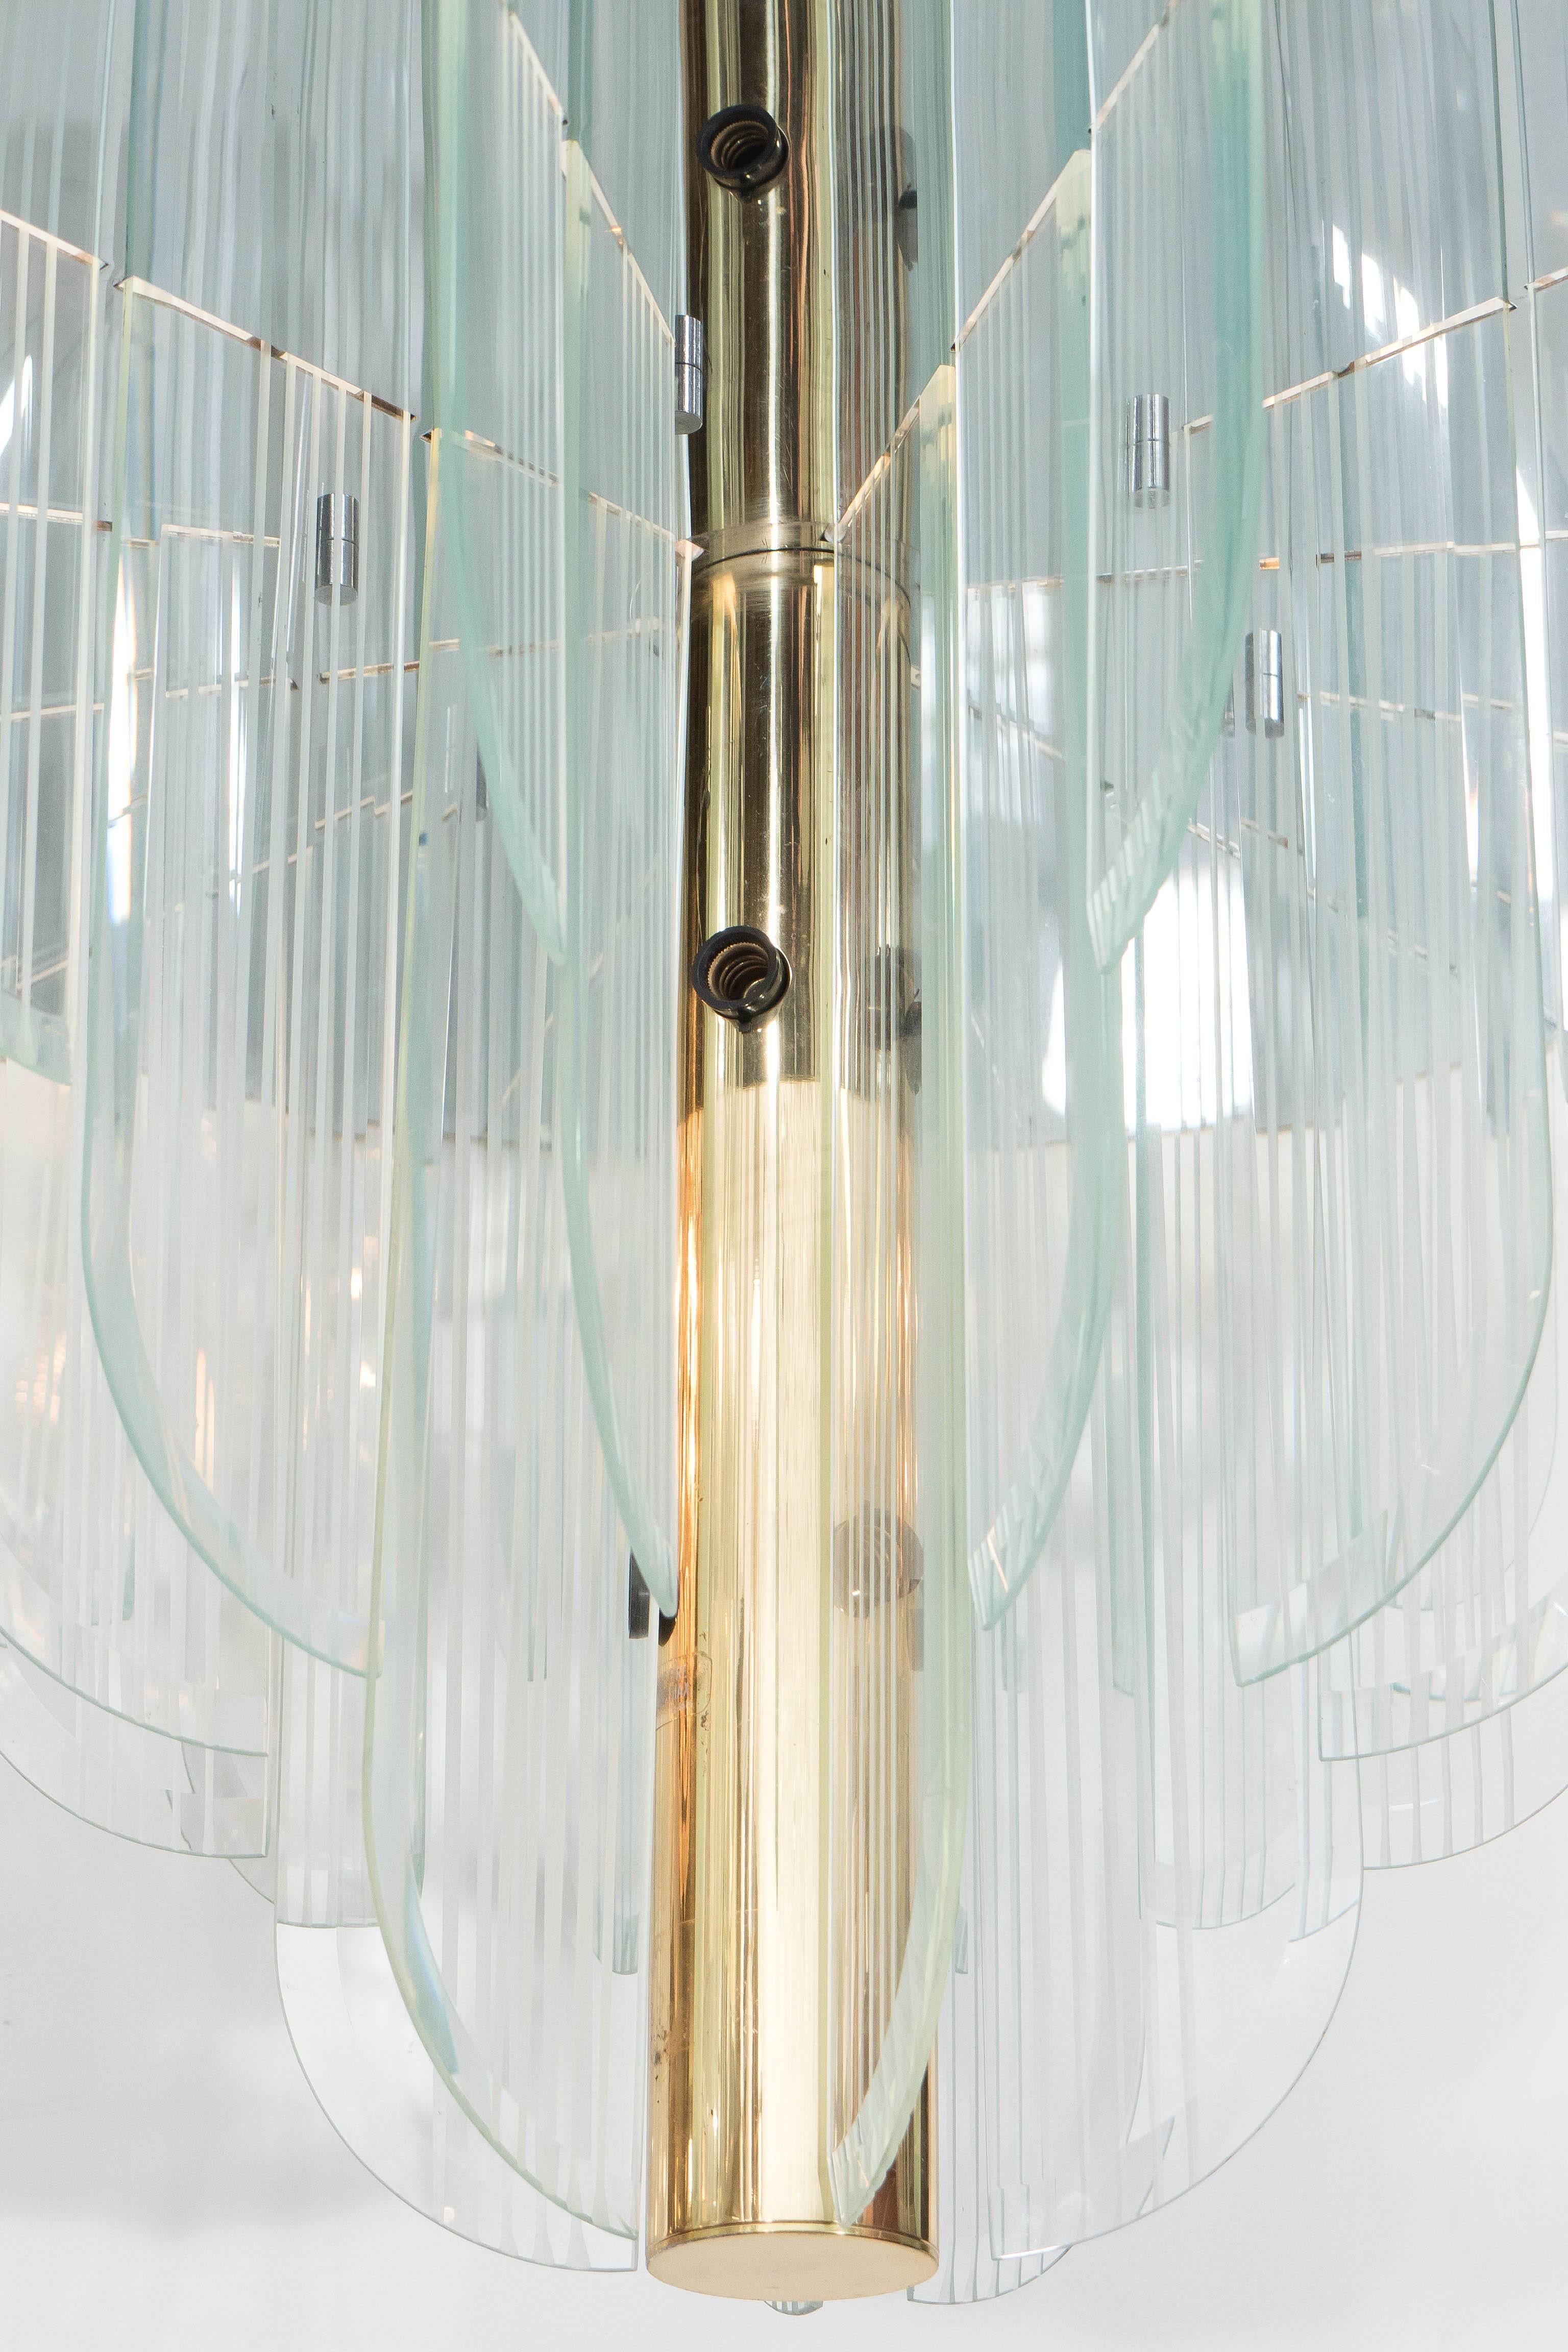 An Art Deco style chandelier, produced circa 1970s by Lightolier, featuring curved glass panels, affixed to a round canopy with reflective plate, supported by a cylindrical nucleus in brass with surrounding sockets. This light fixture remains in